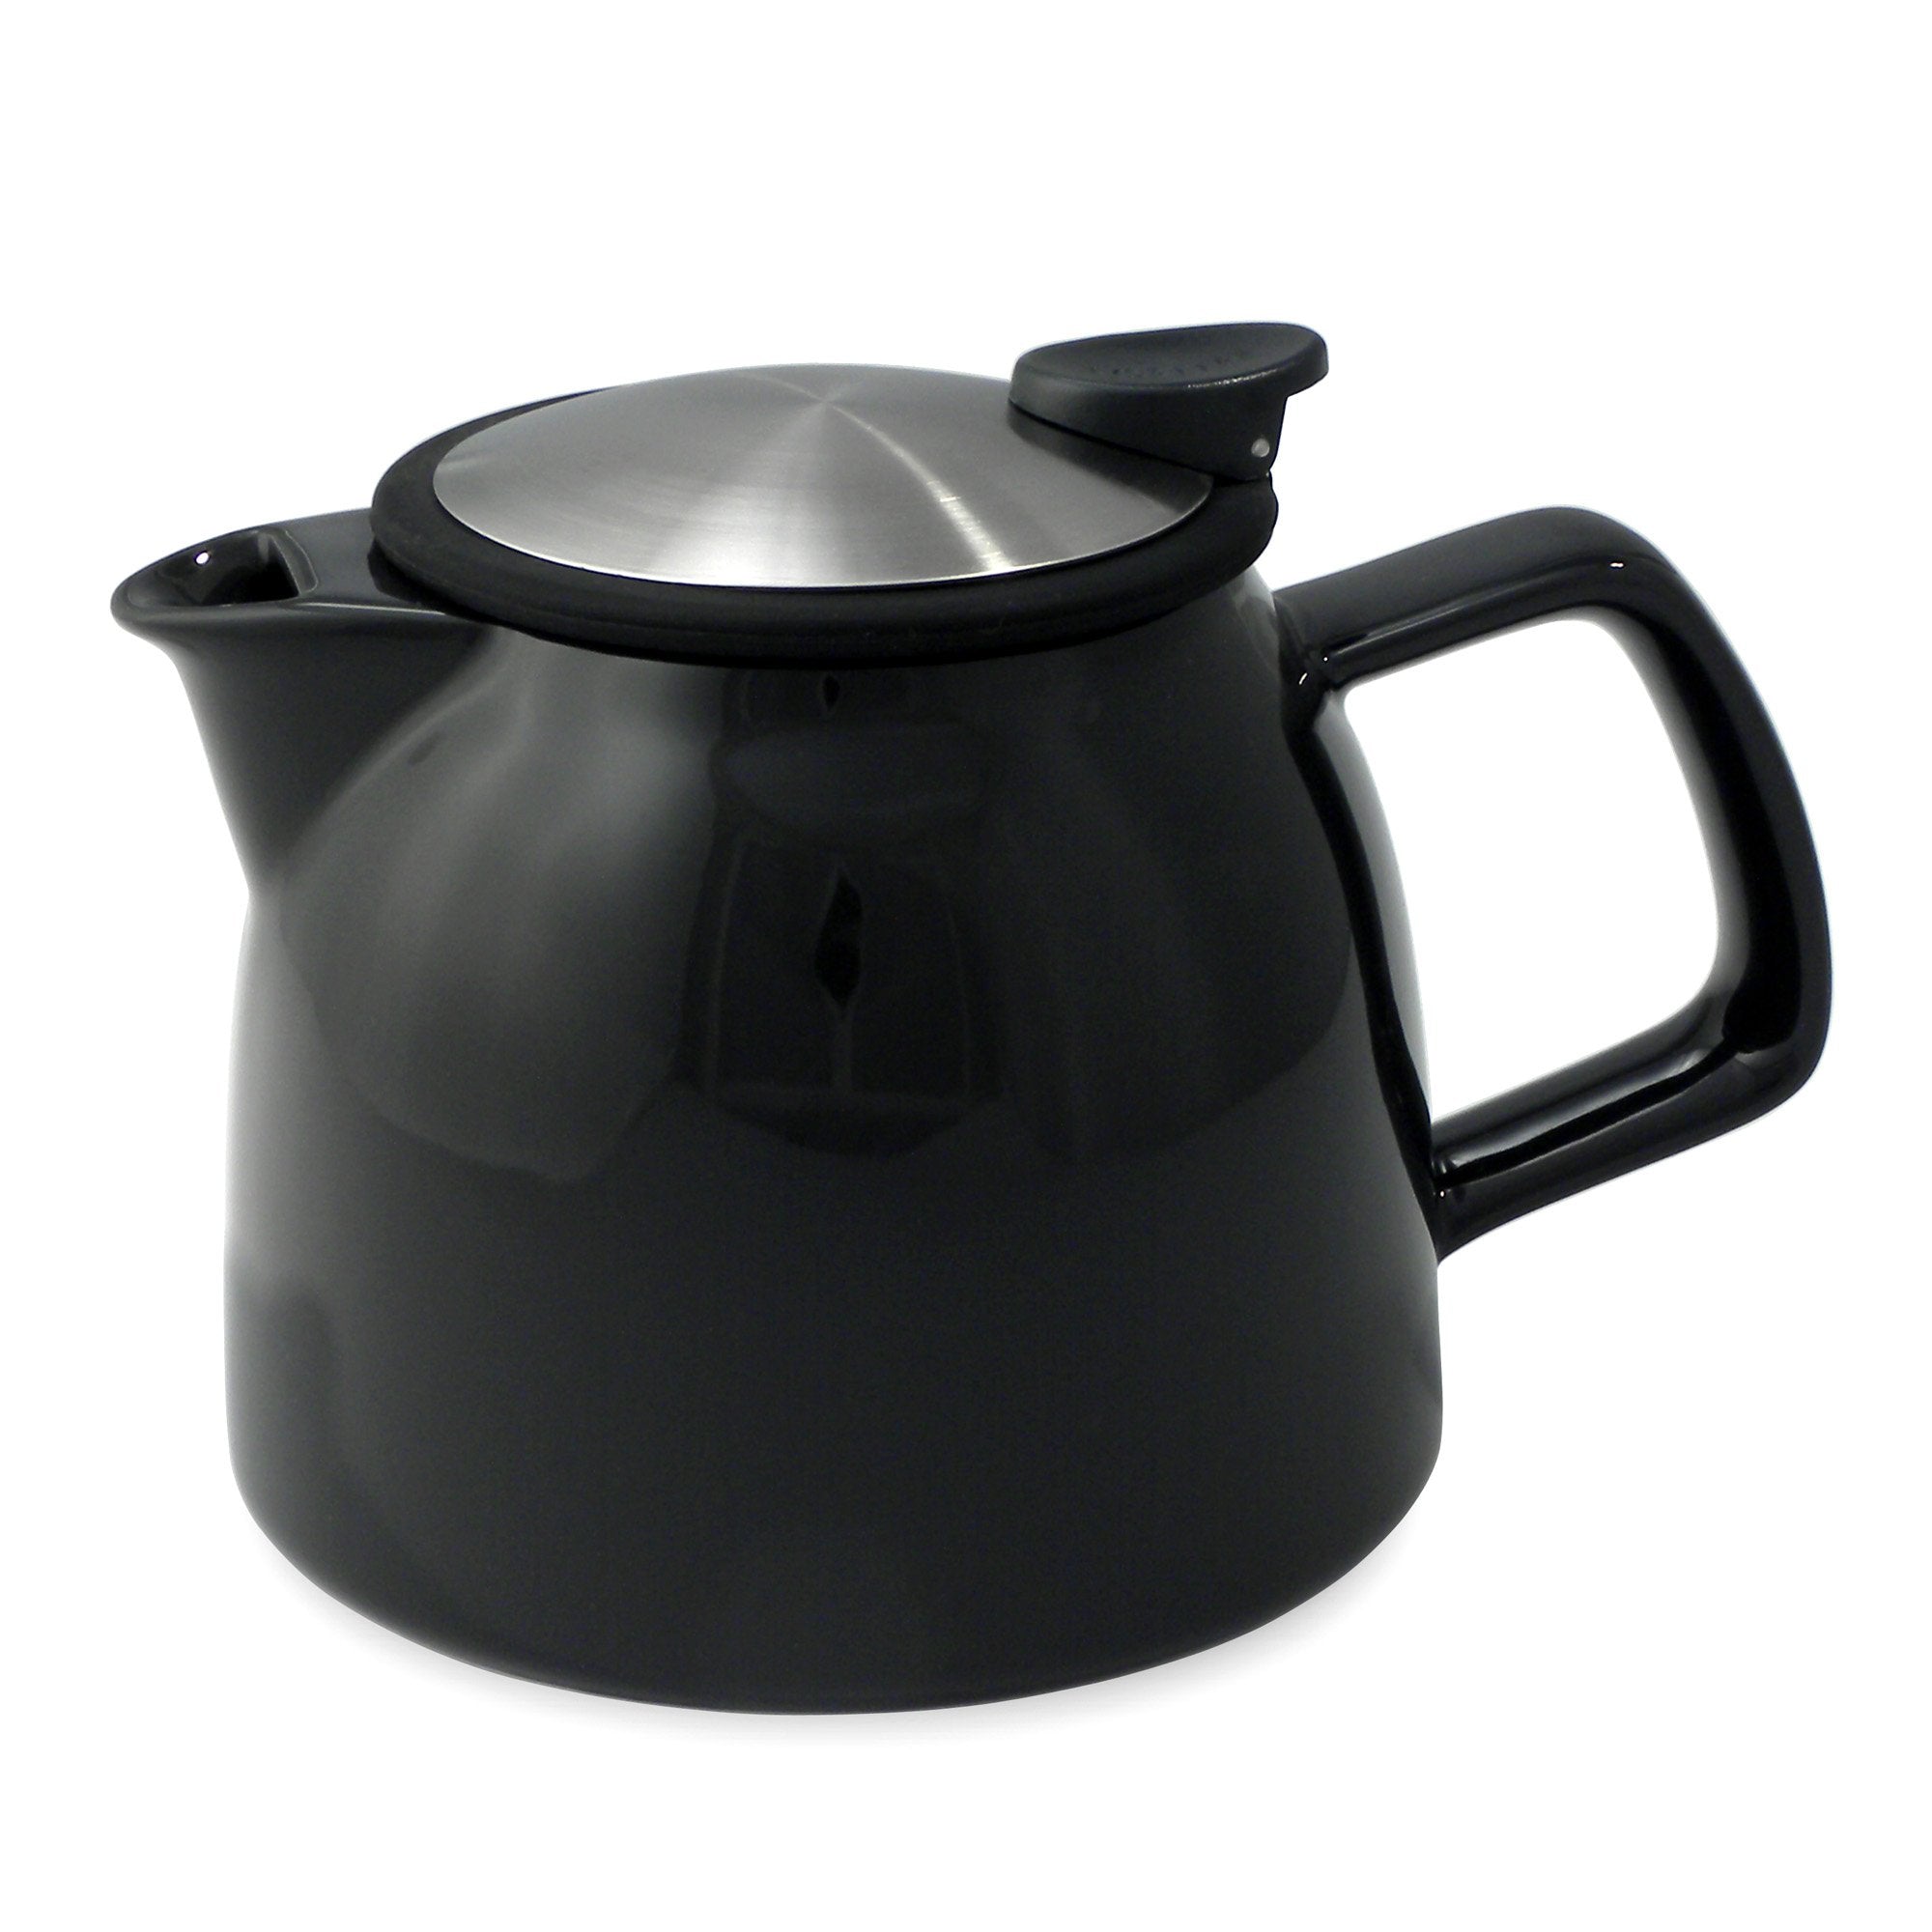 Tealula 26 oz bell-shaped black teapot with square handle and black and silver detachable push-on-lid